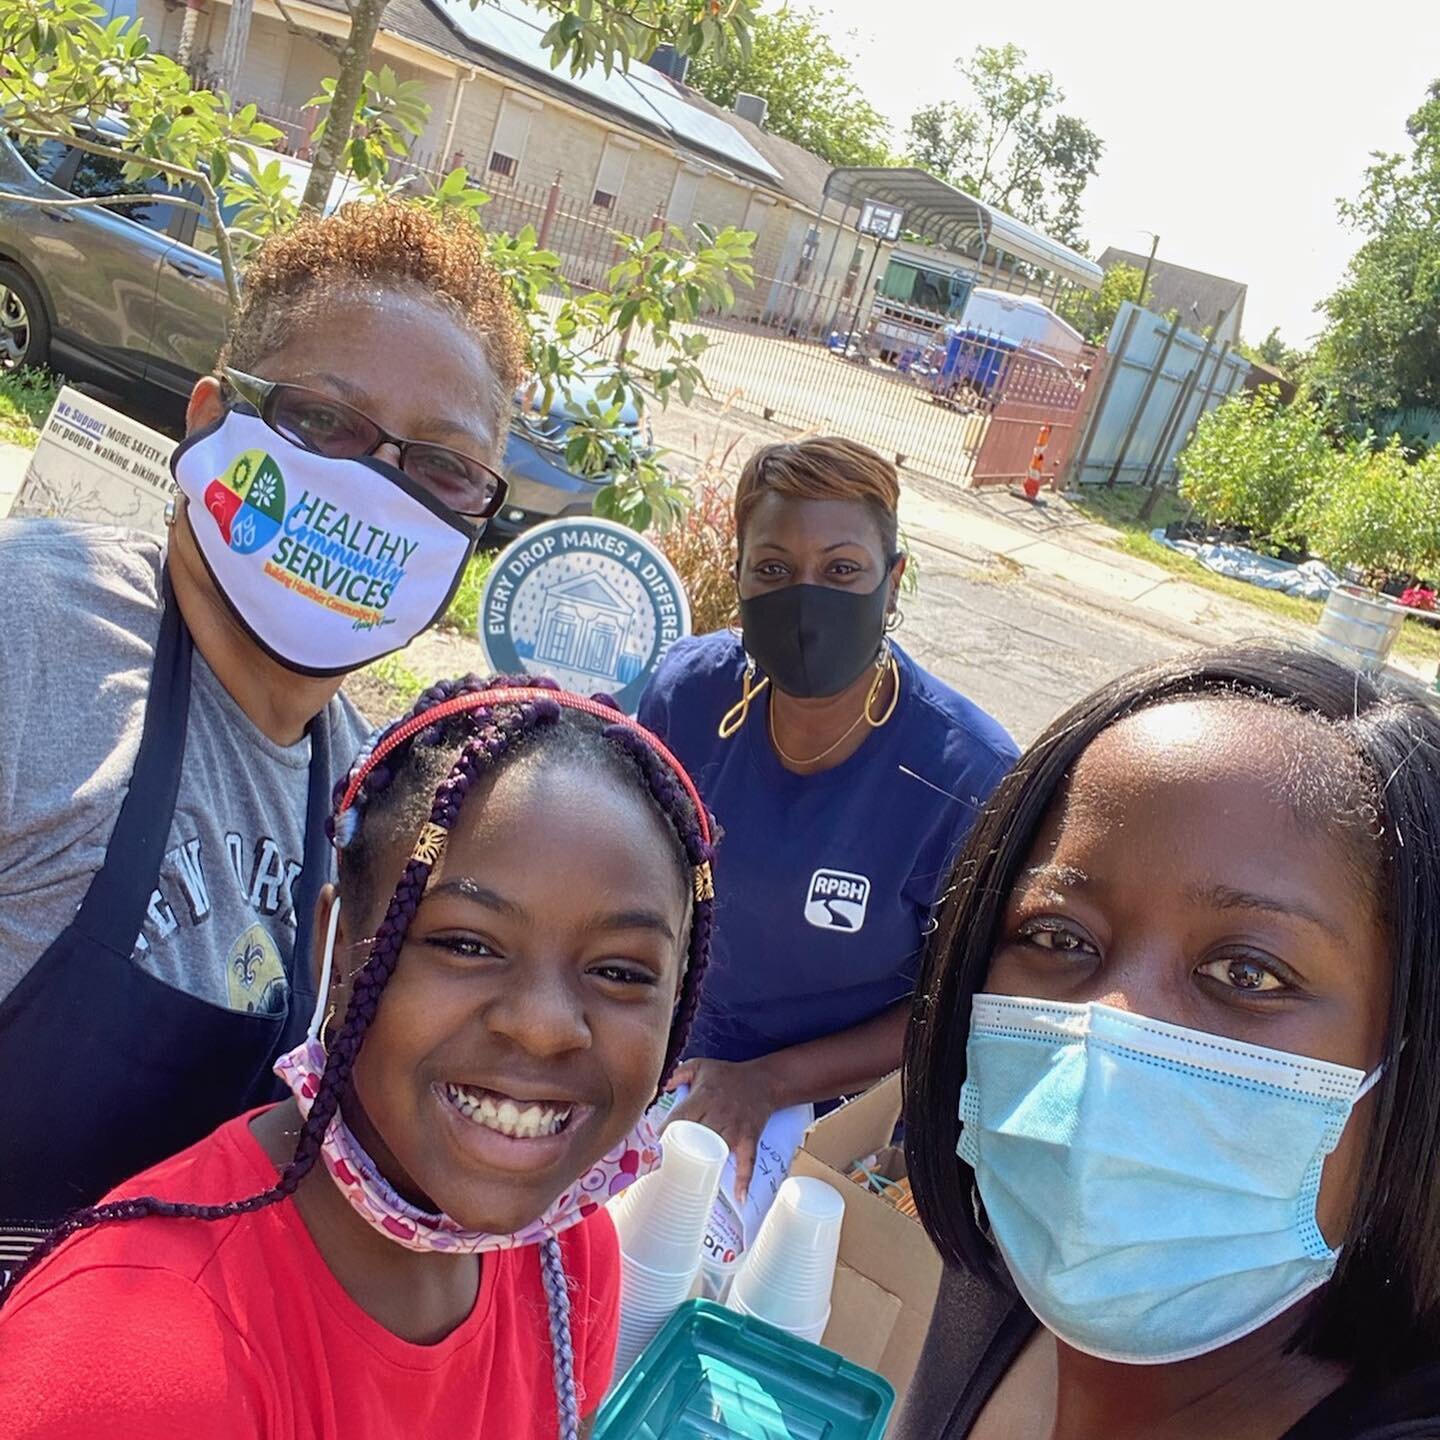 Healthy Community Services | Featured Seed Hub
New Orleans, LA
Healthy Community Services held a 'Seeds and Soil' give-a-way. This was an outdoor event which followed COVID-19 guidelines. Residents were provided the option of 4 different packages of 